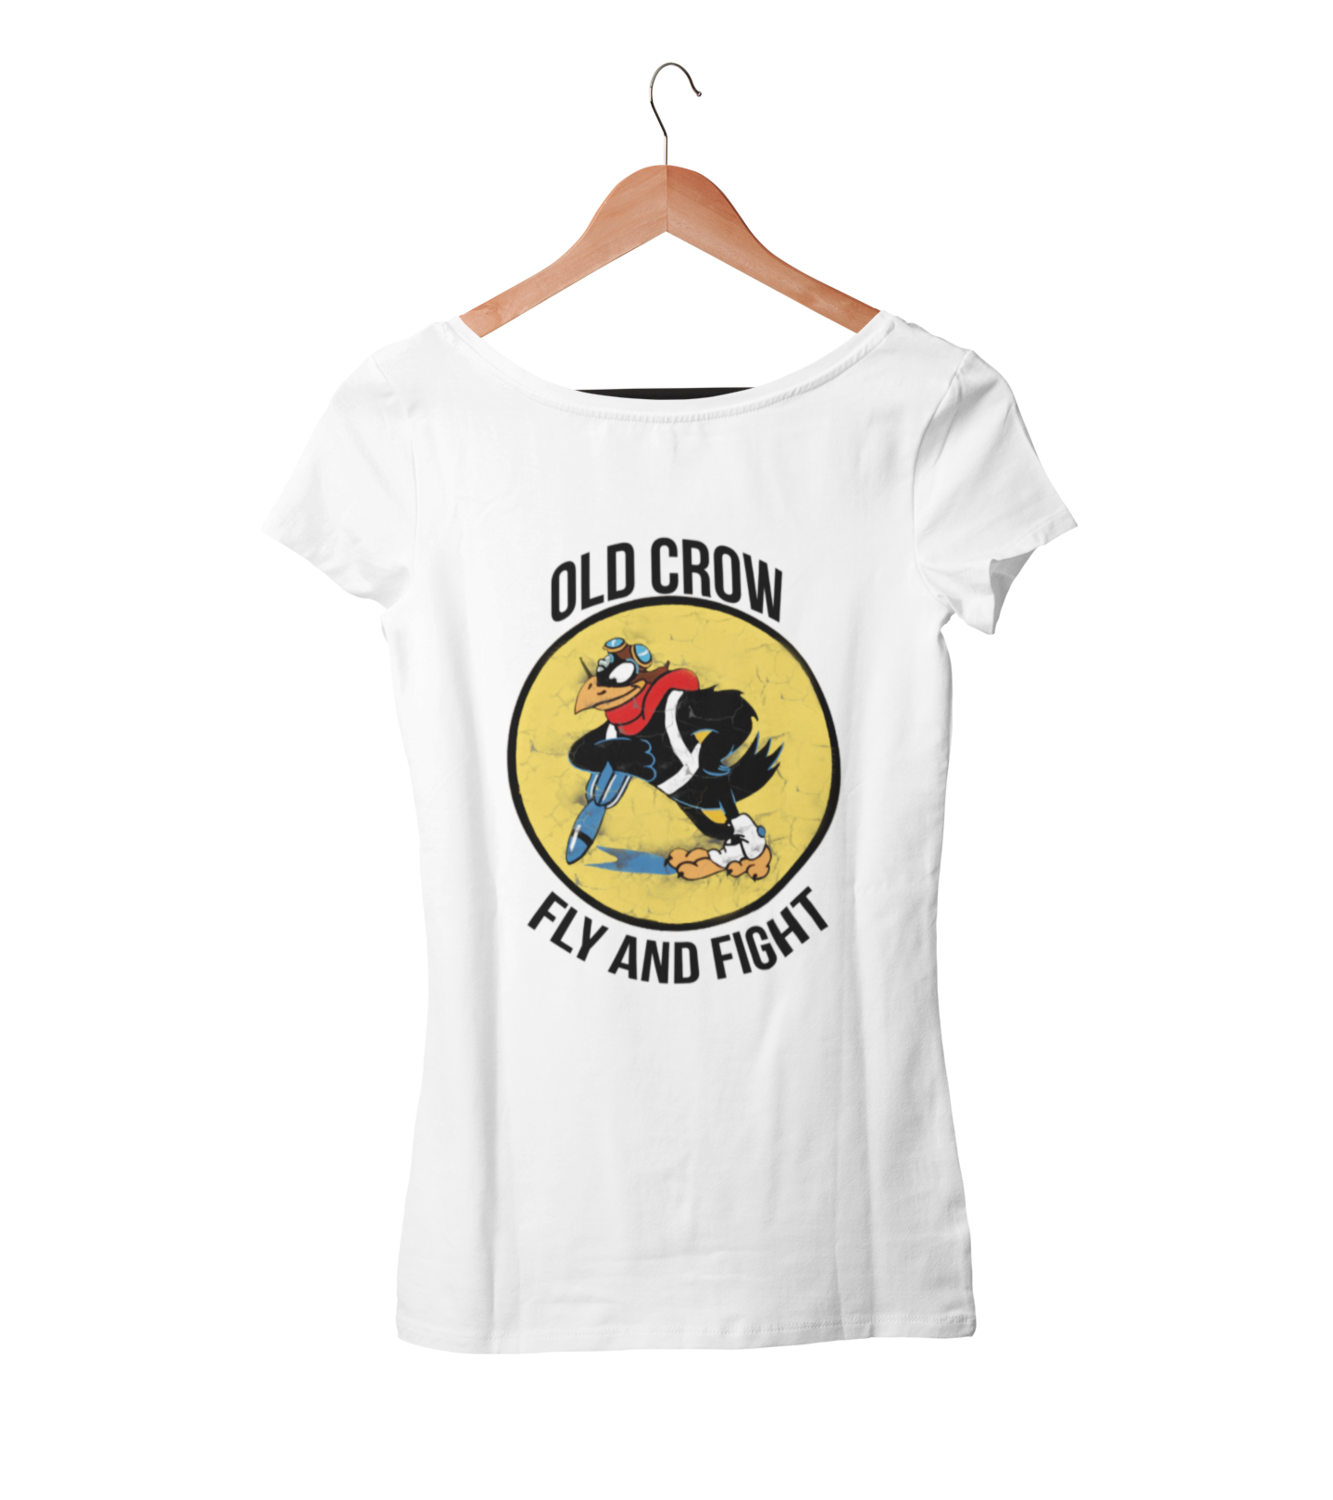 OLD CROW T-SHIRT FOR WOMEN